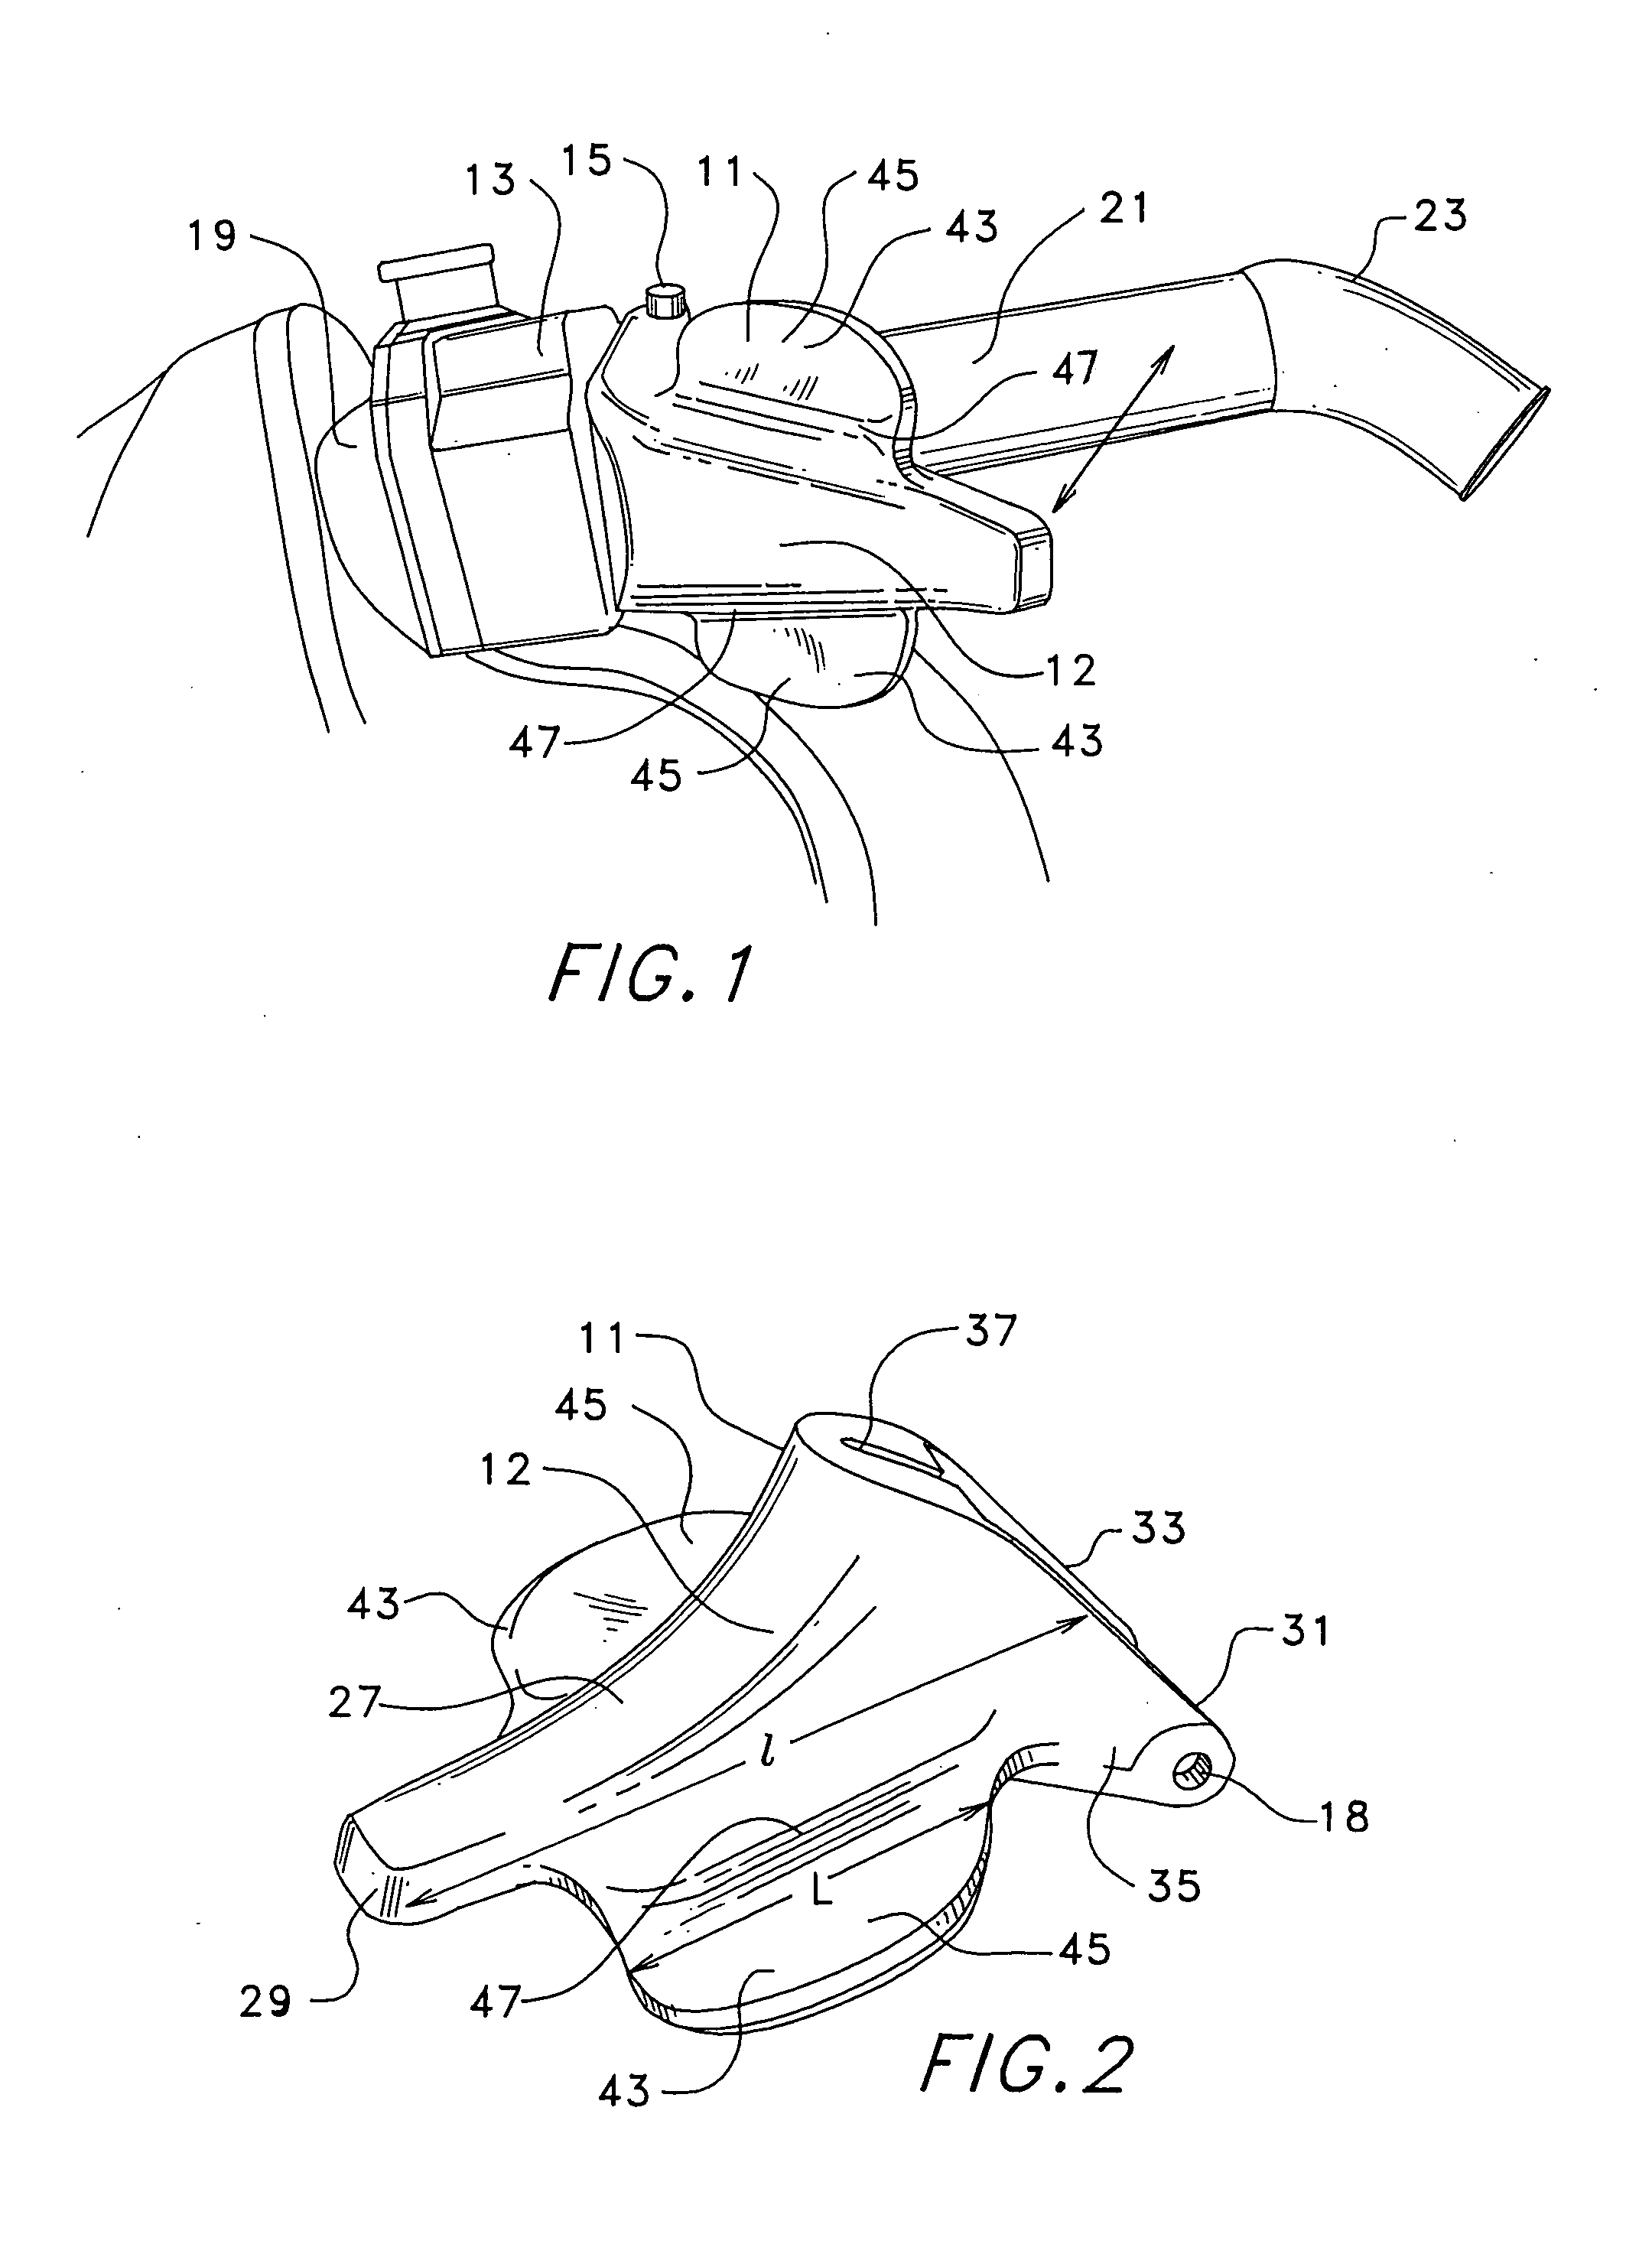 Modified manual control lever devices and methods